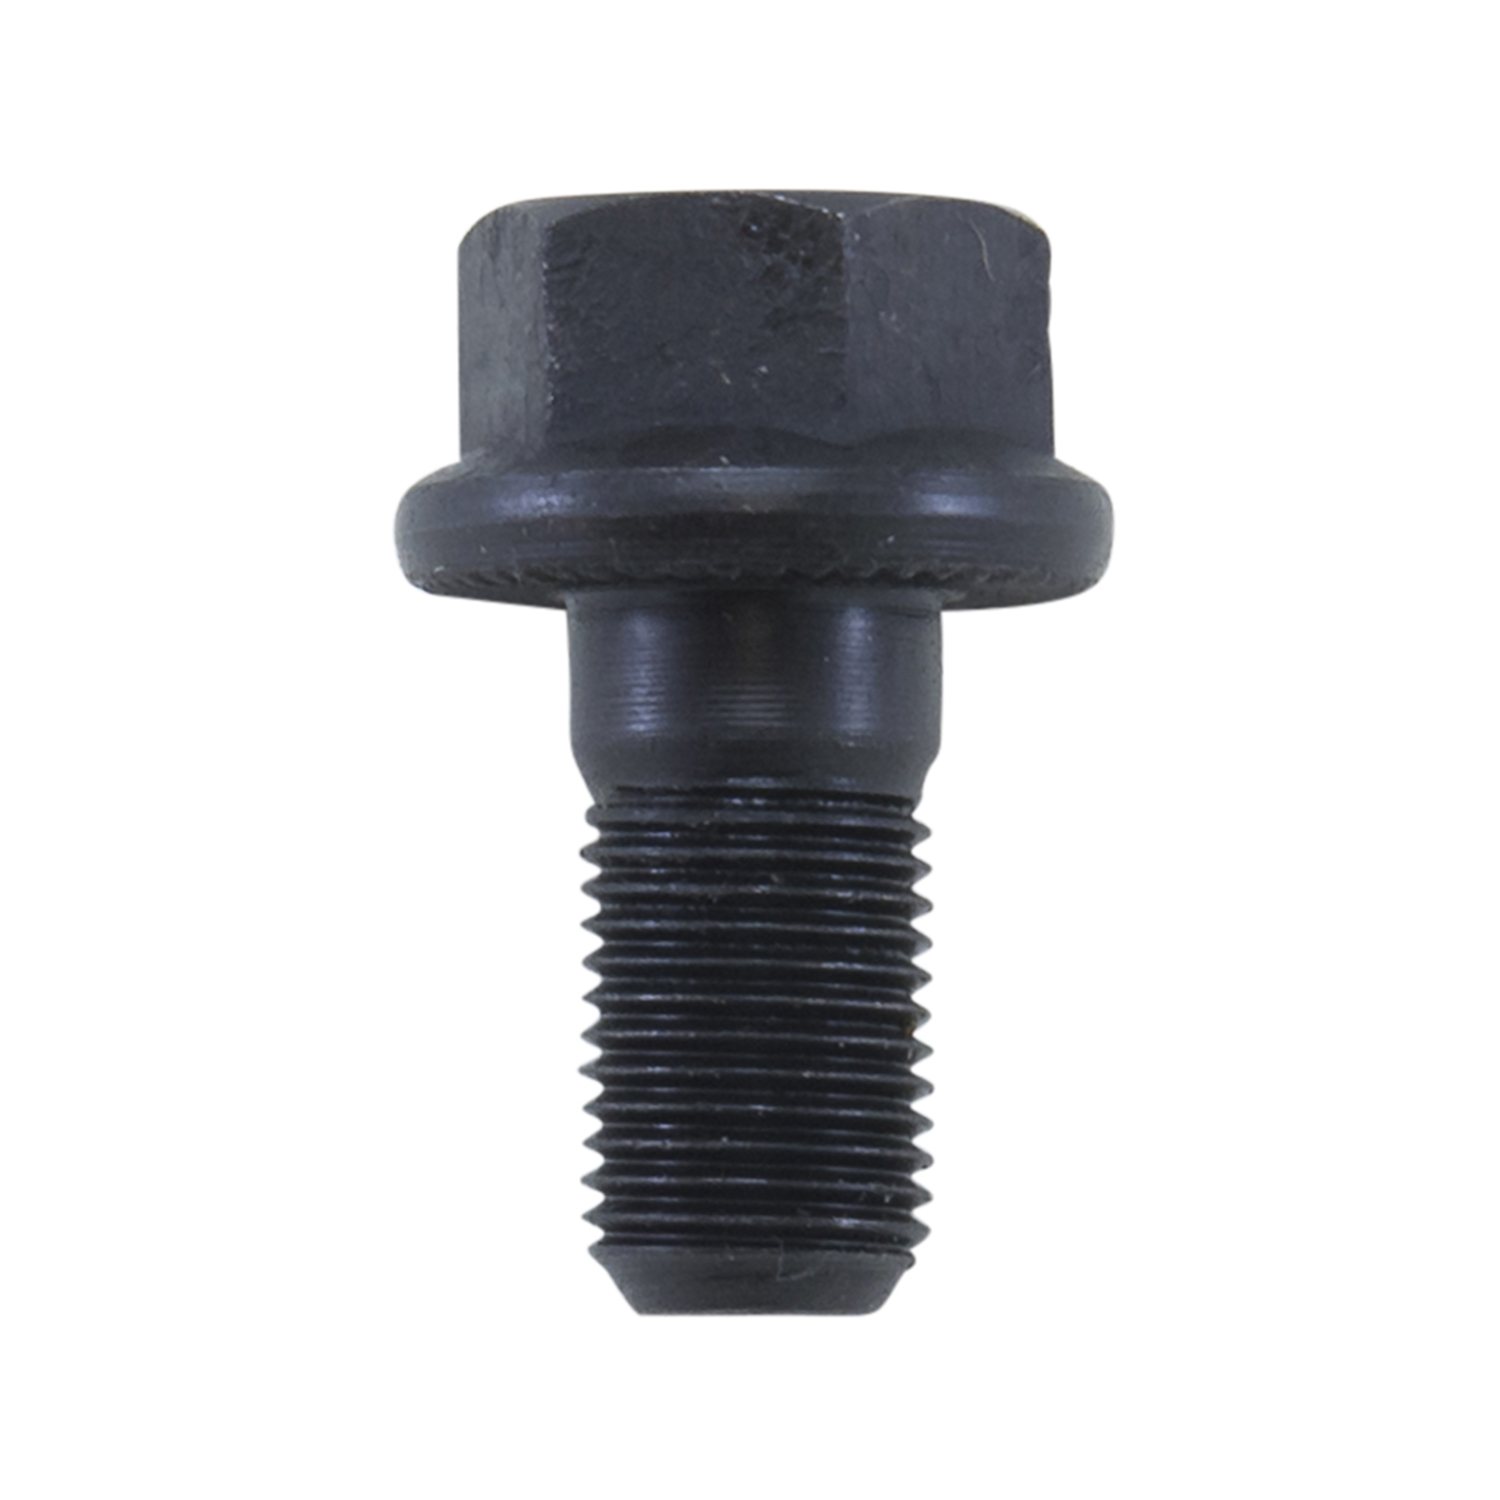 Replacement ring gear bolt for Dana 44 JK Rubicon front. 